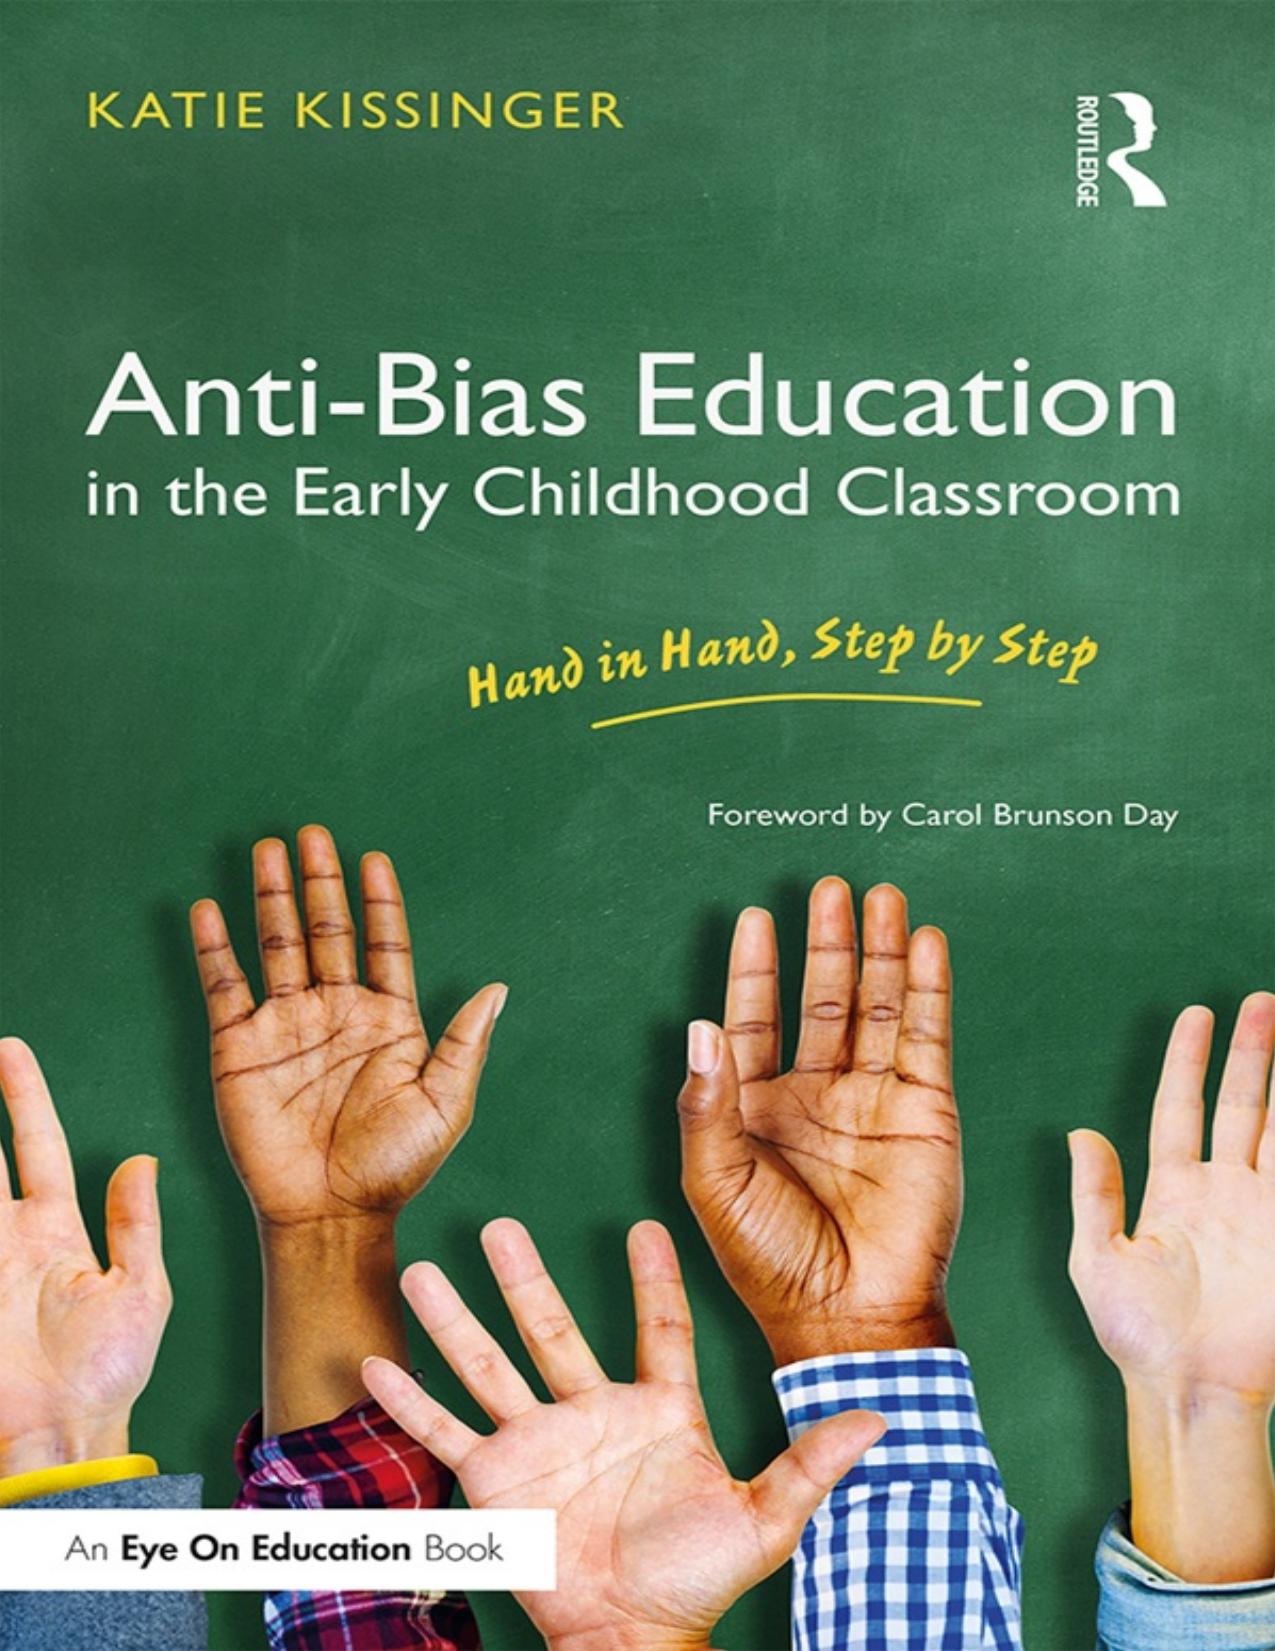 Anti-Bias Education in the Early Childhood Classroom - PDFDrive.com